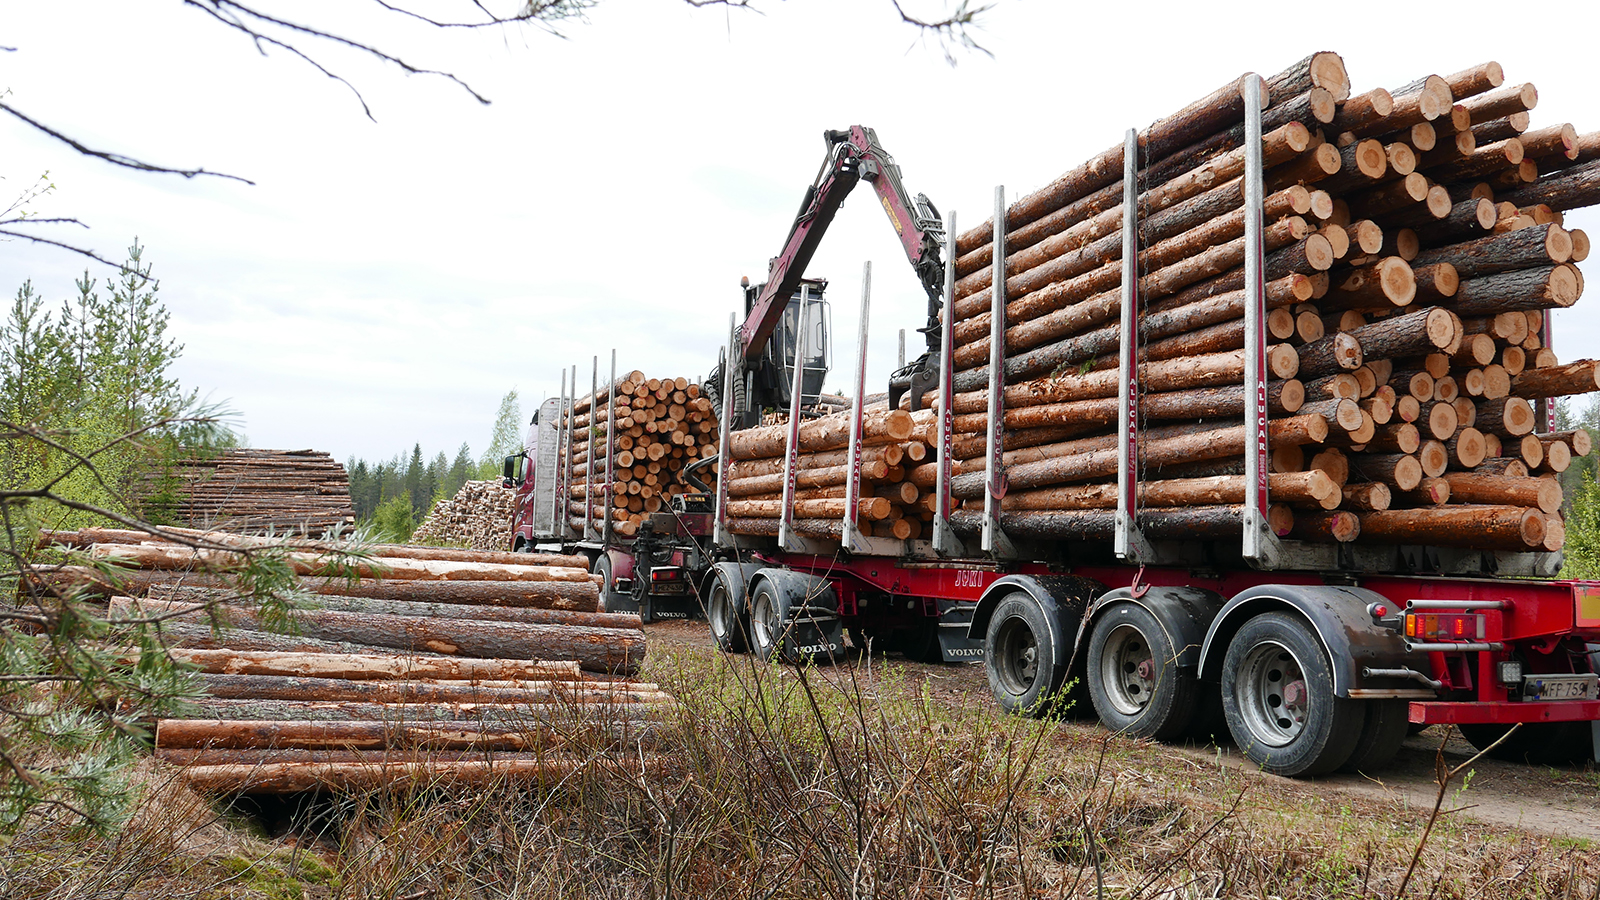 An improvement of the road network is also urgently needed because the vehicles carrying timber and wood chips have become significantly larger. Photo: Päivi Mäki